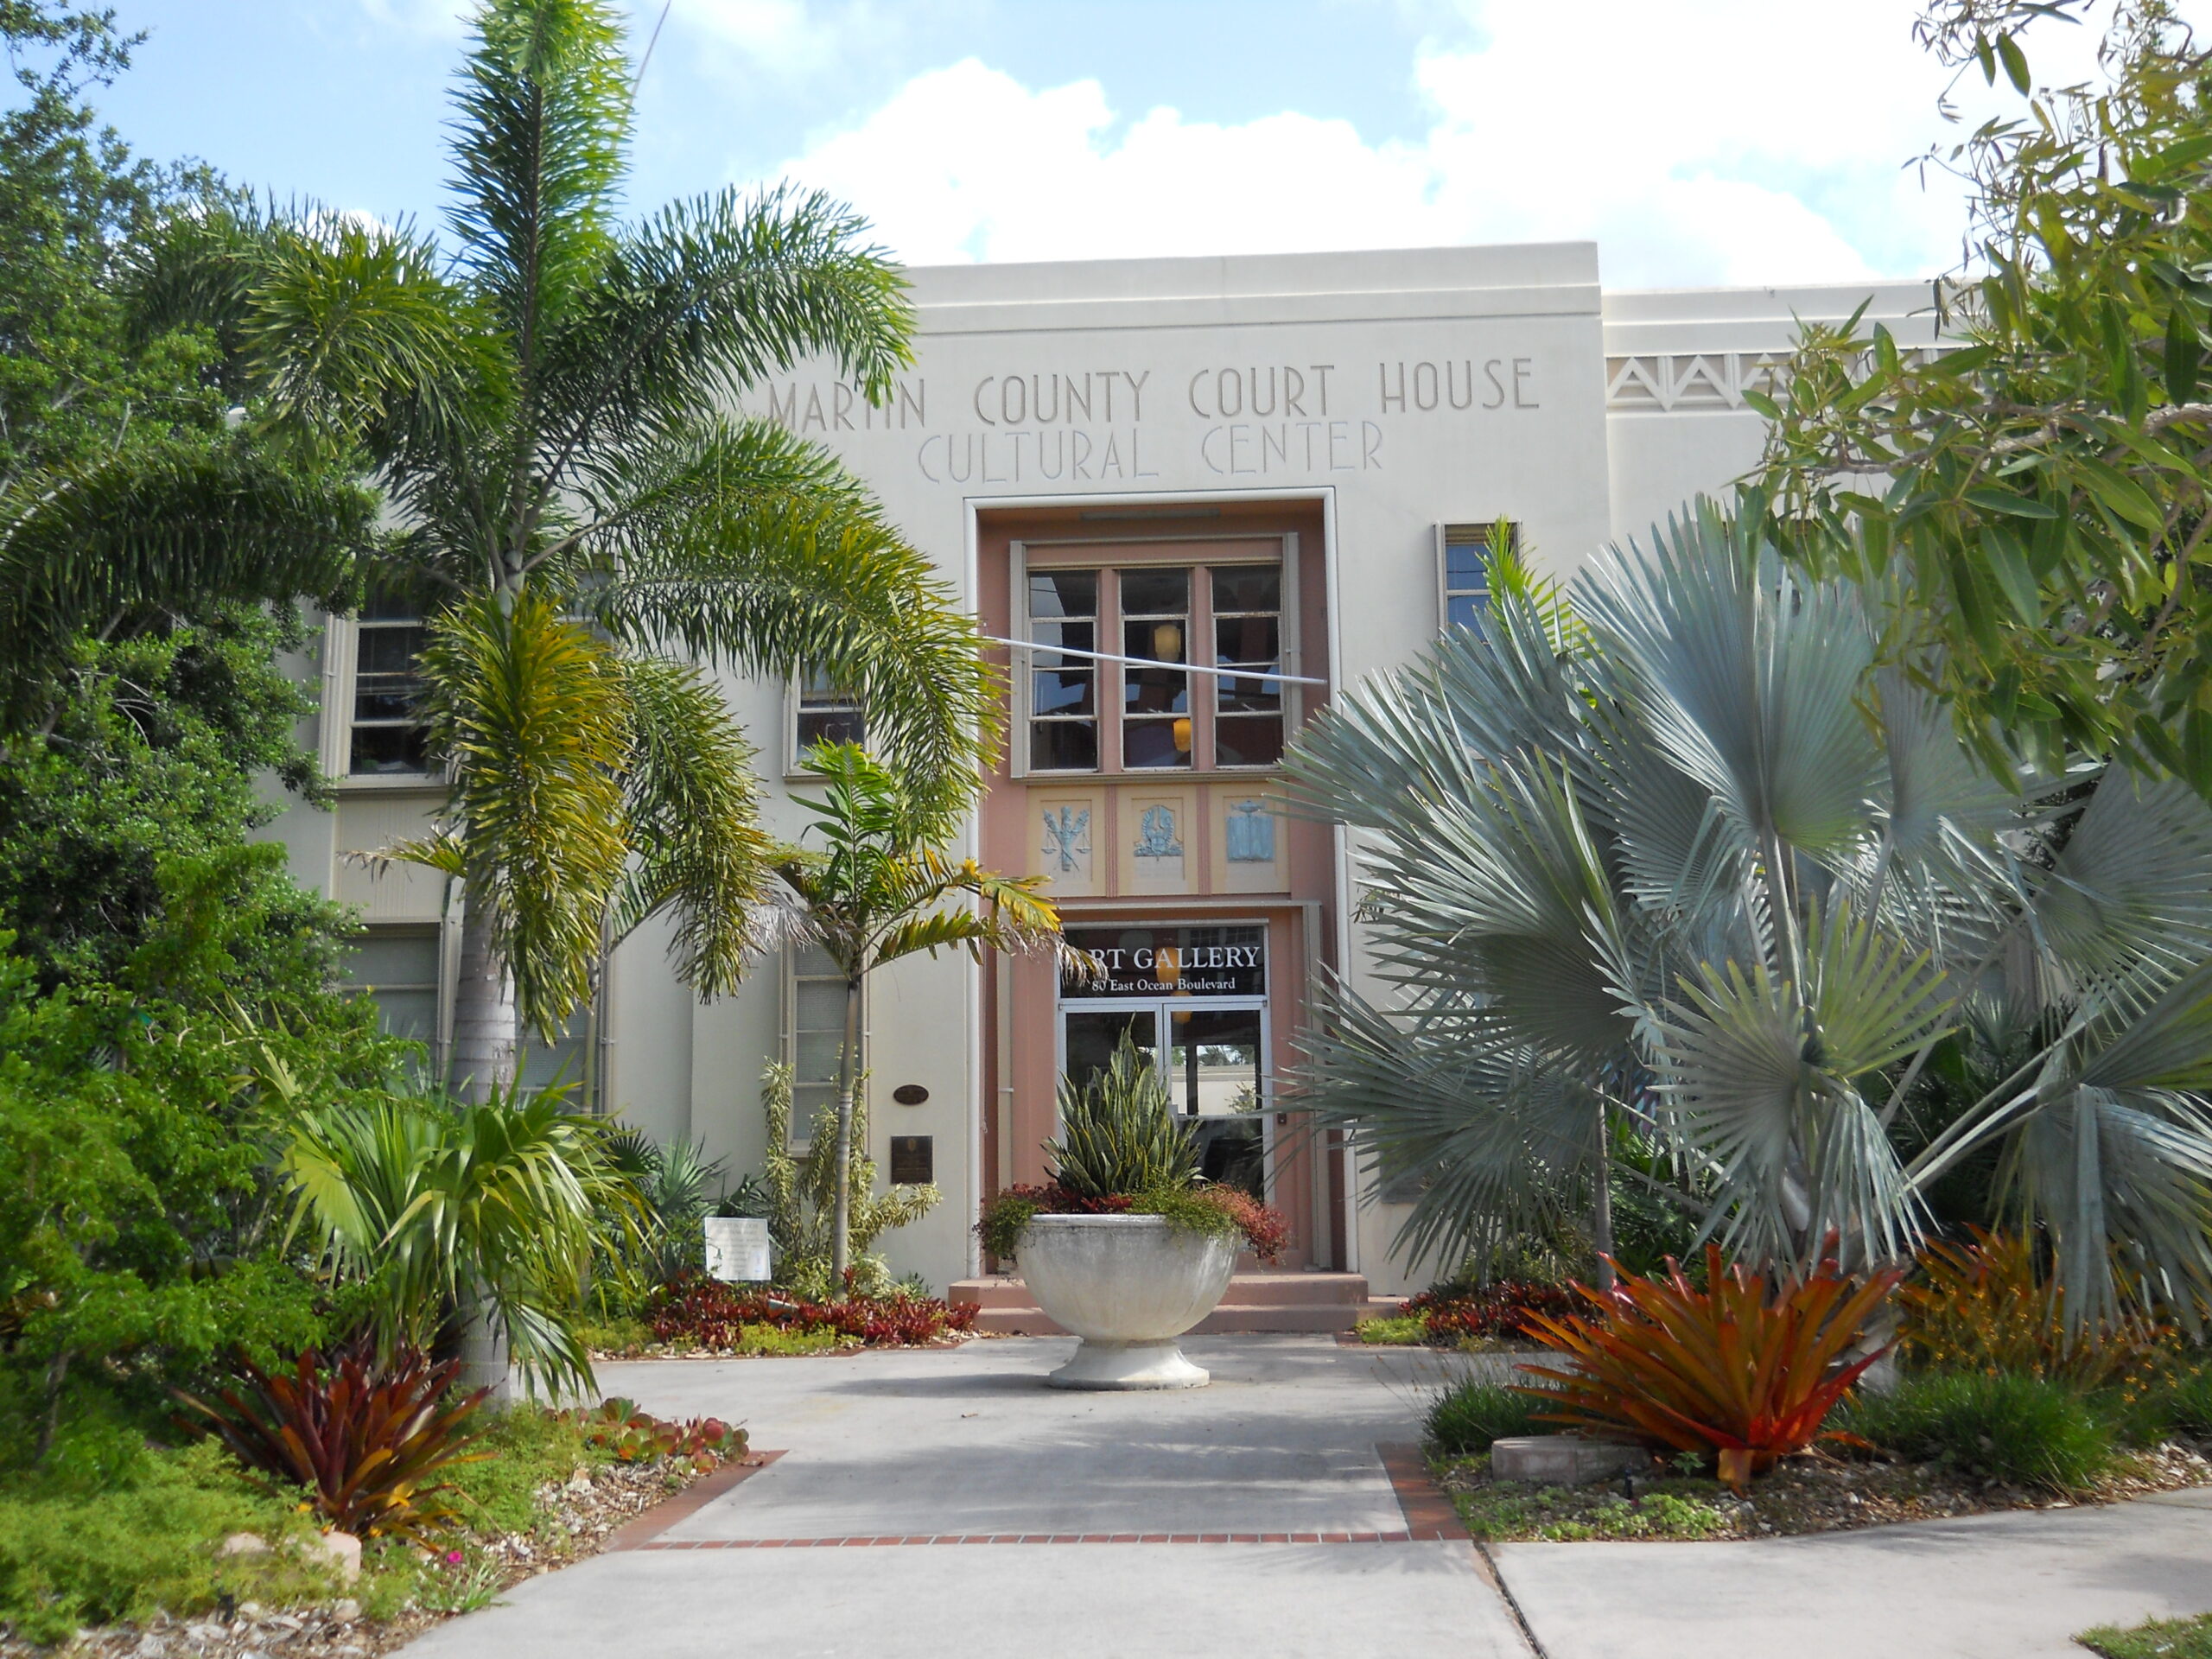 The 1937 Martin County Court House - The Court House Cultural Center Martin County Arts